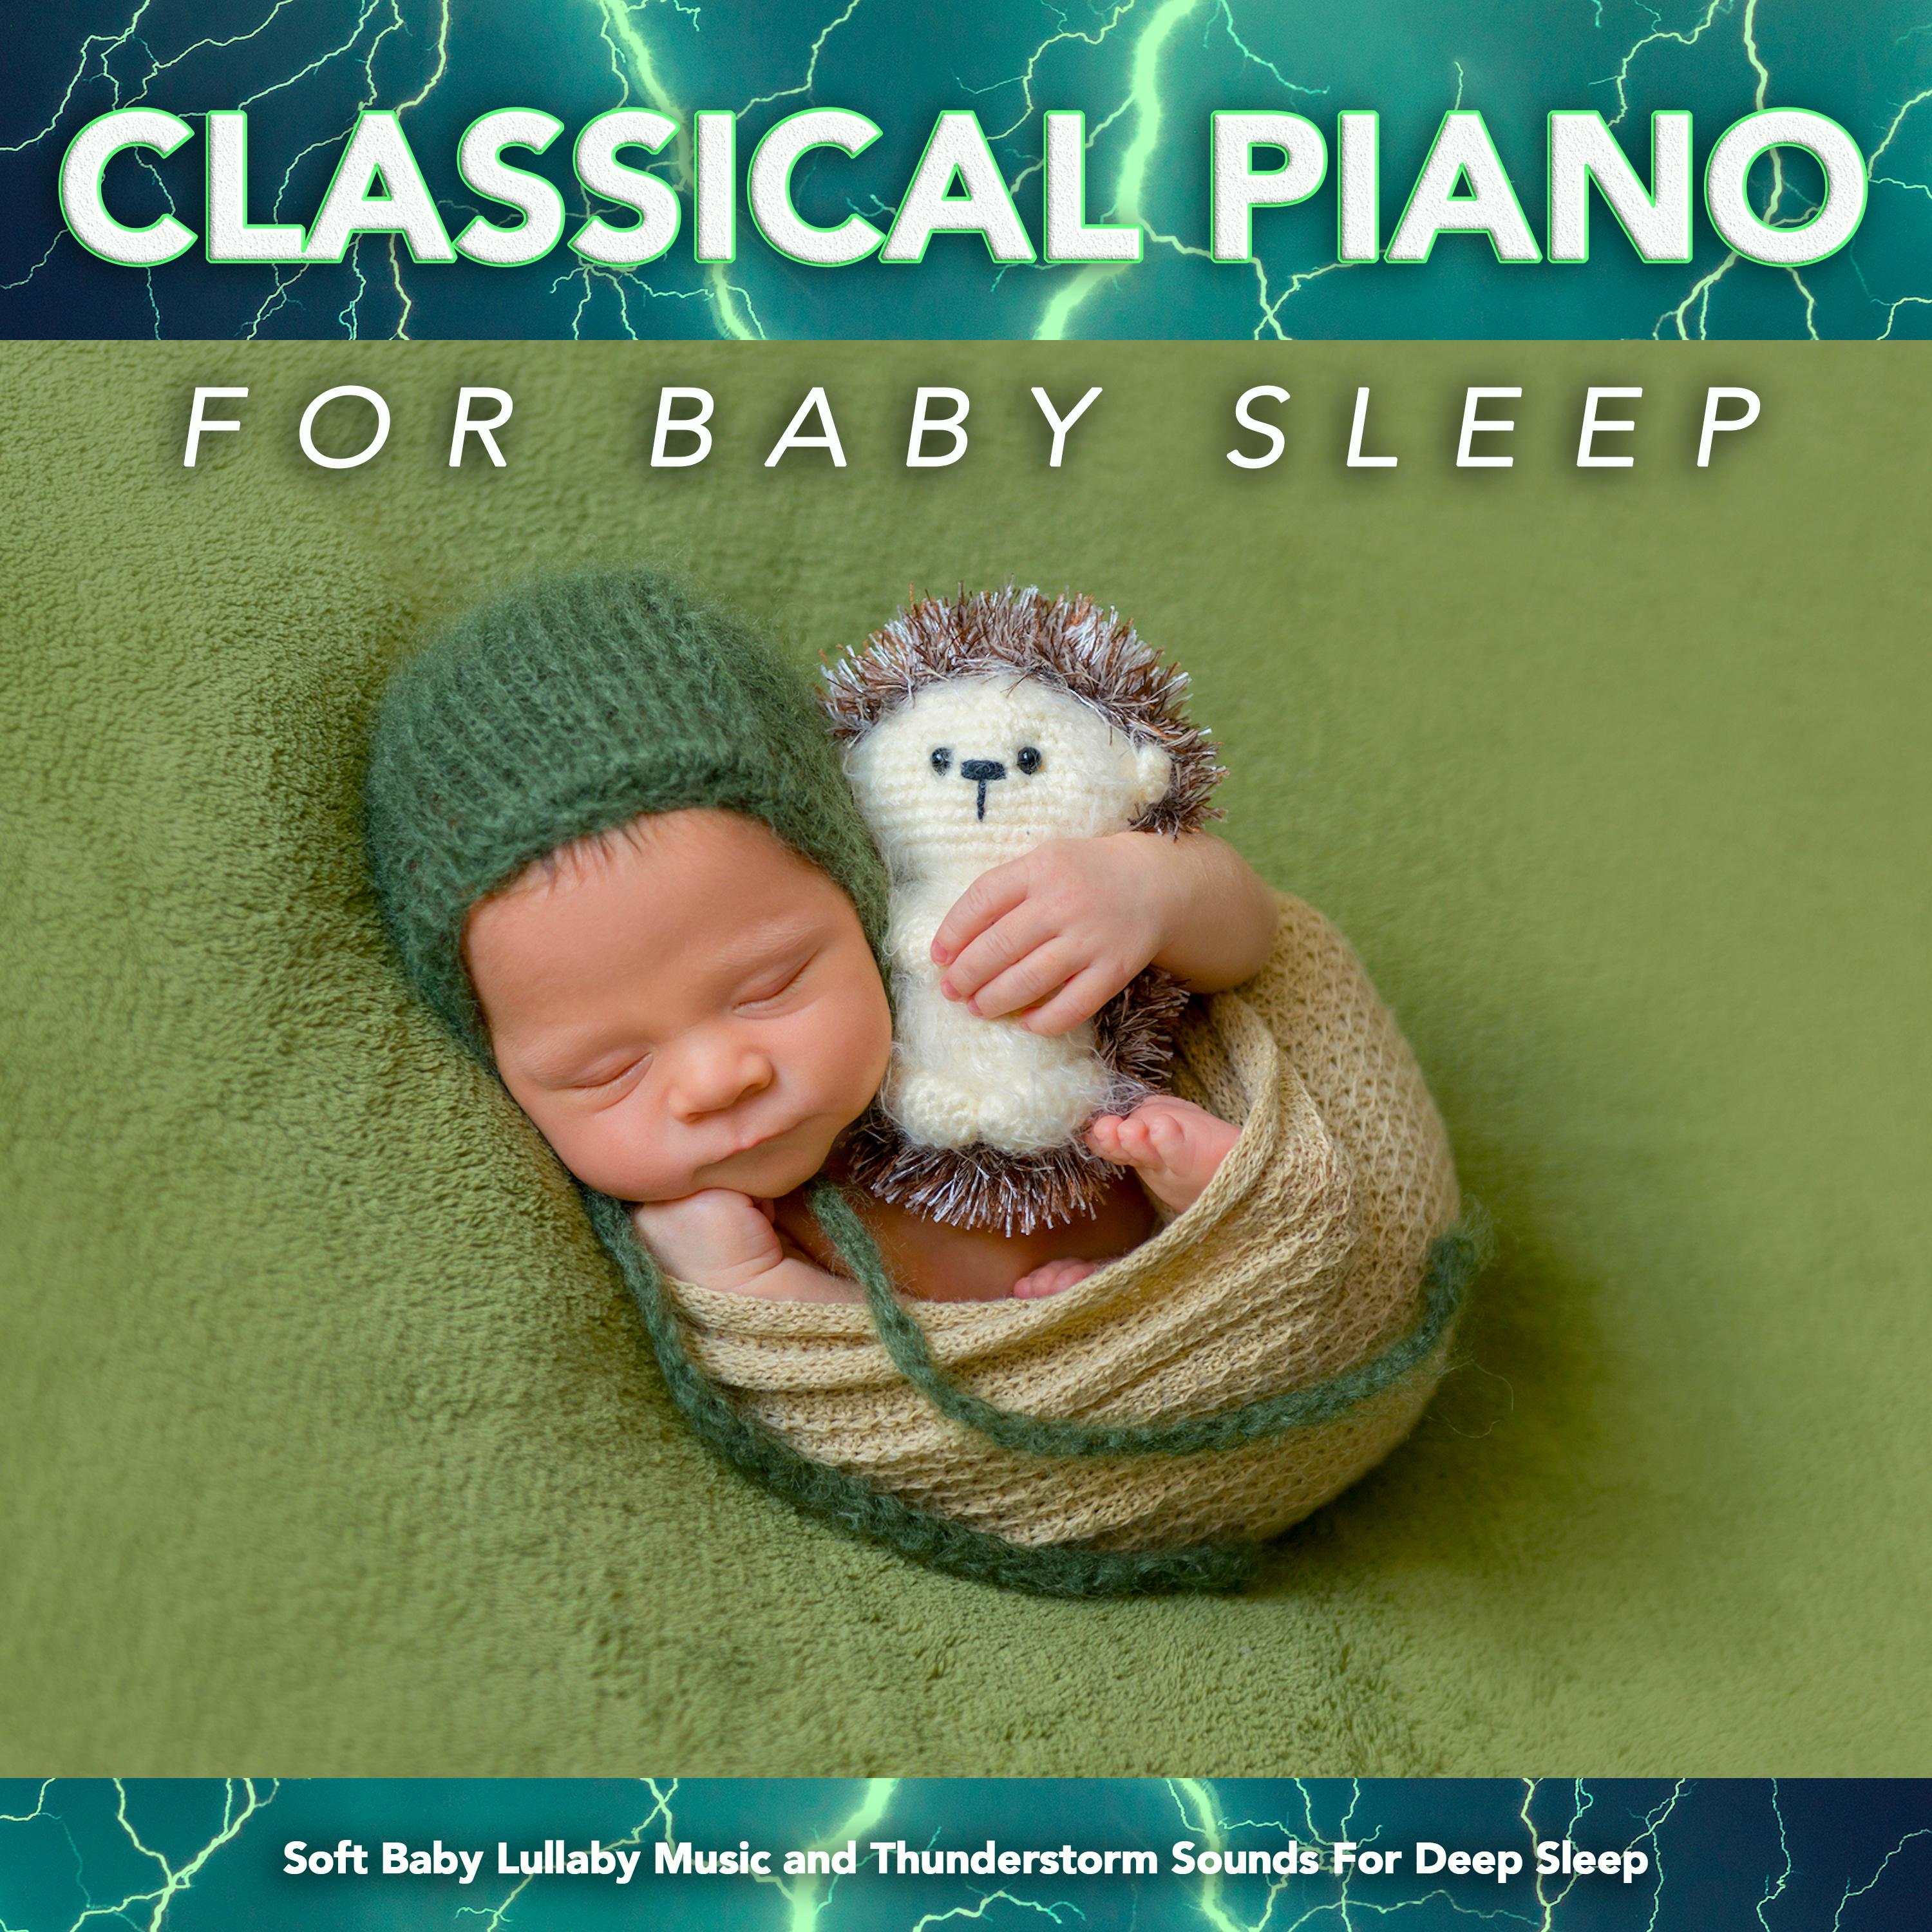 Etude in E - Chopin - Soft Baby Lullaby Music - Thunderstorm Sounds - Classical Piano for Baby Sleep